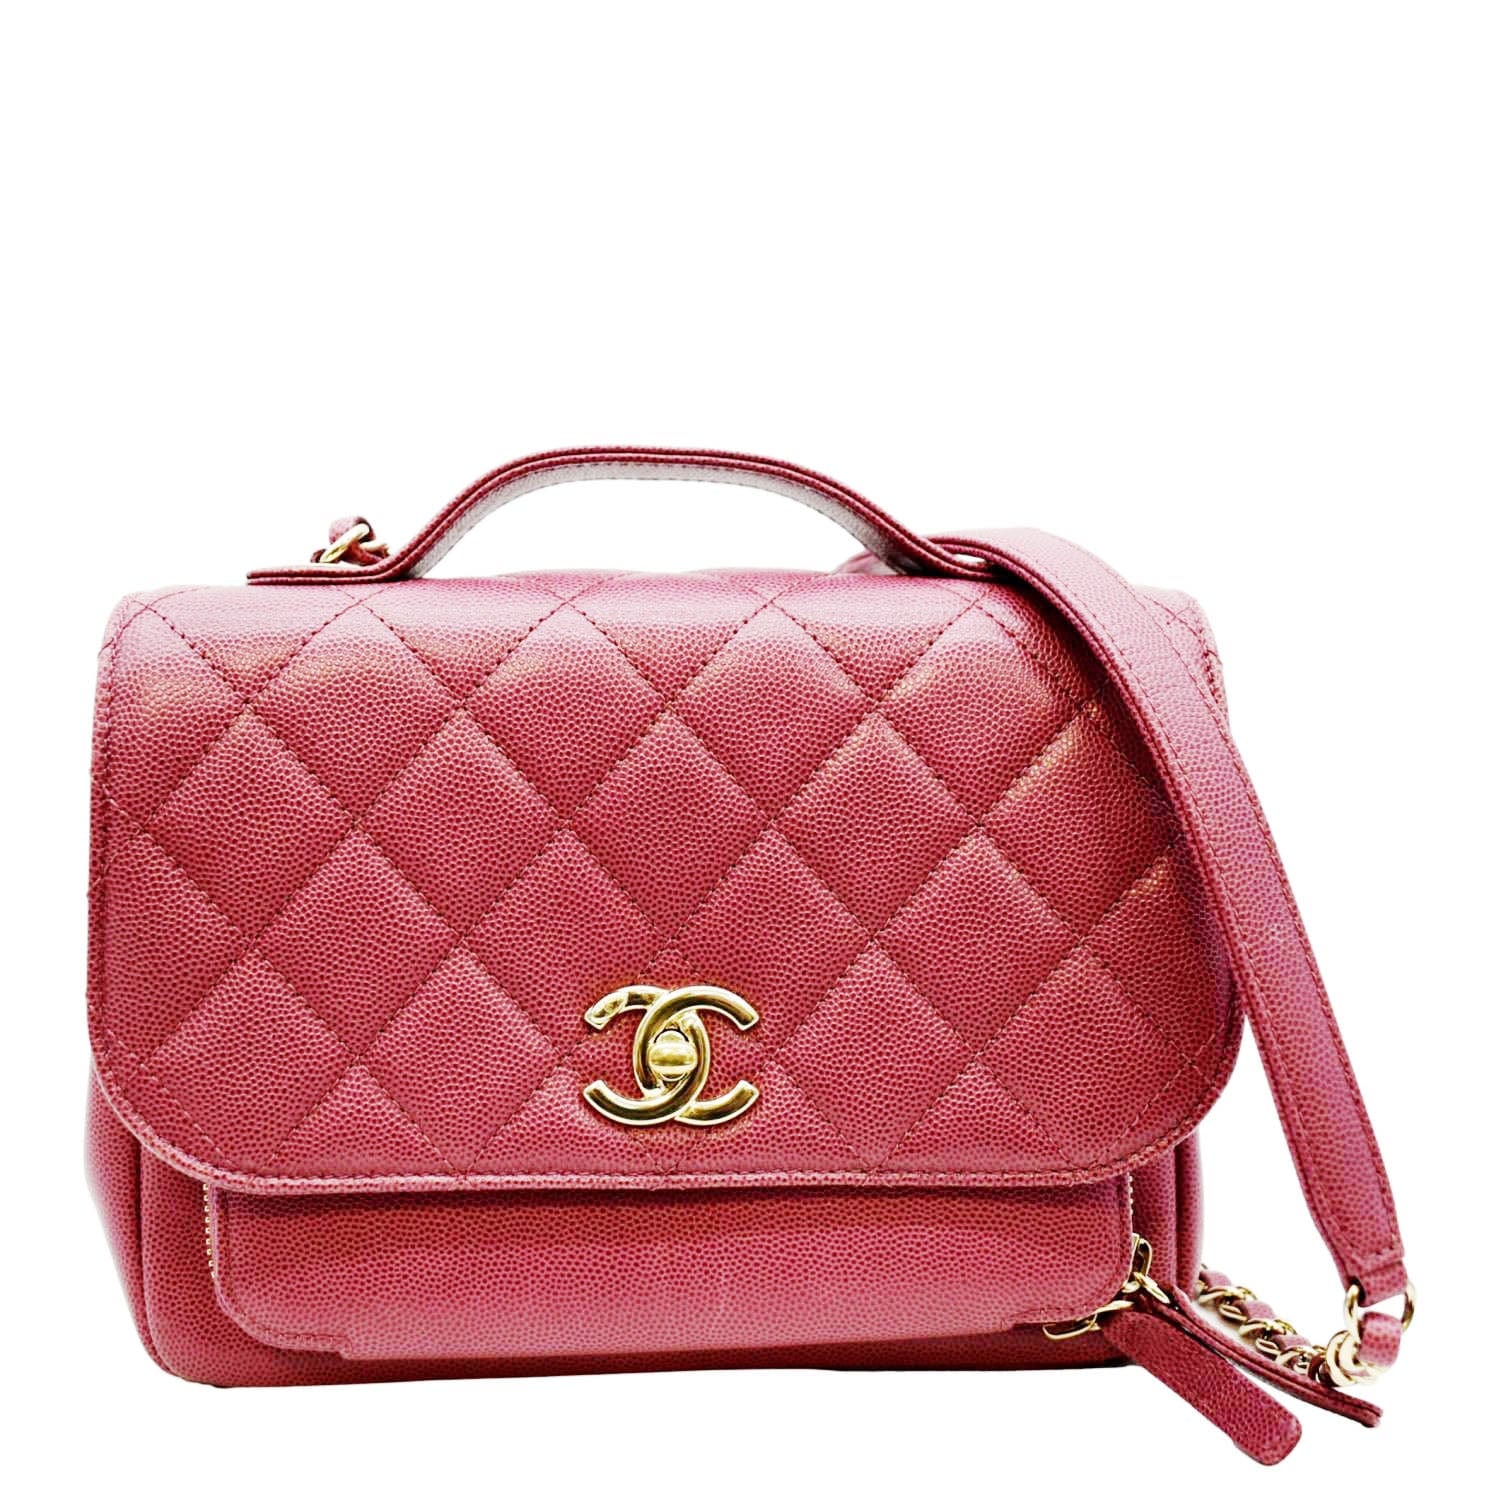 Business Affinity Tote Quilted Caviar Small